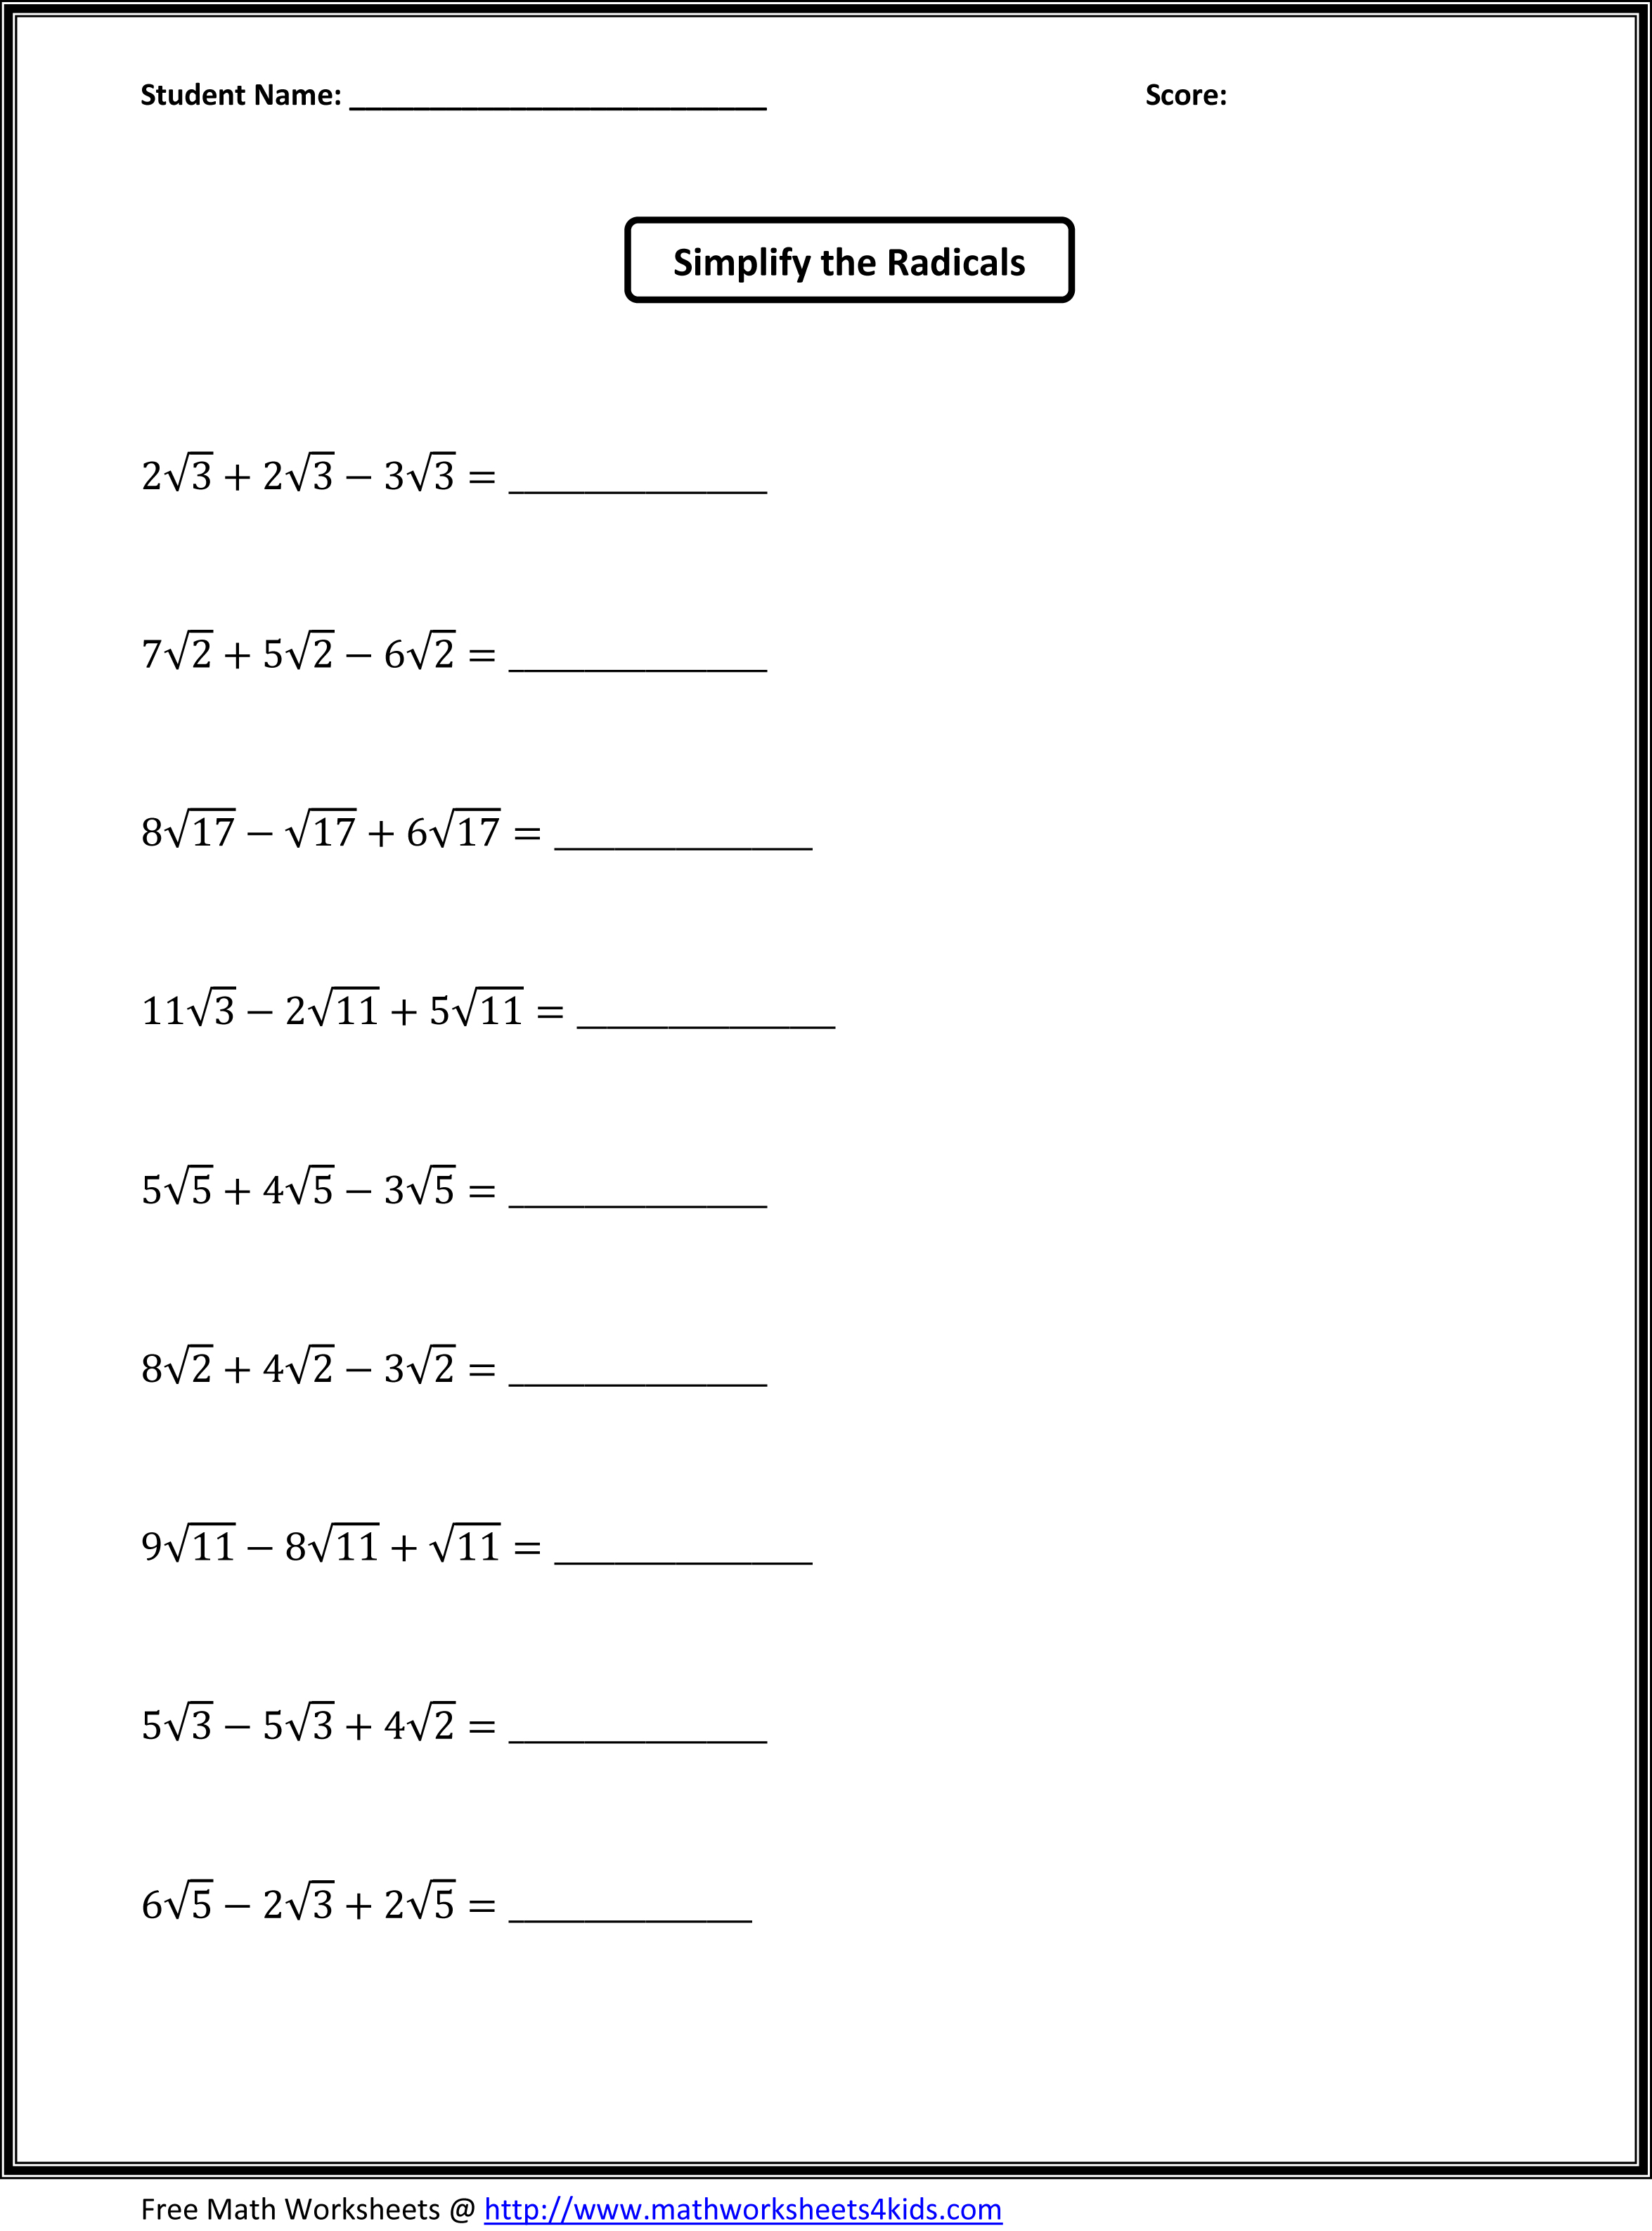 10 Images of 7th Grade Math Worksheets With Answer Key